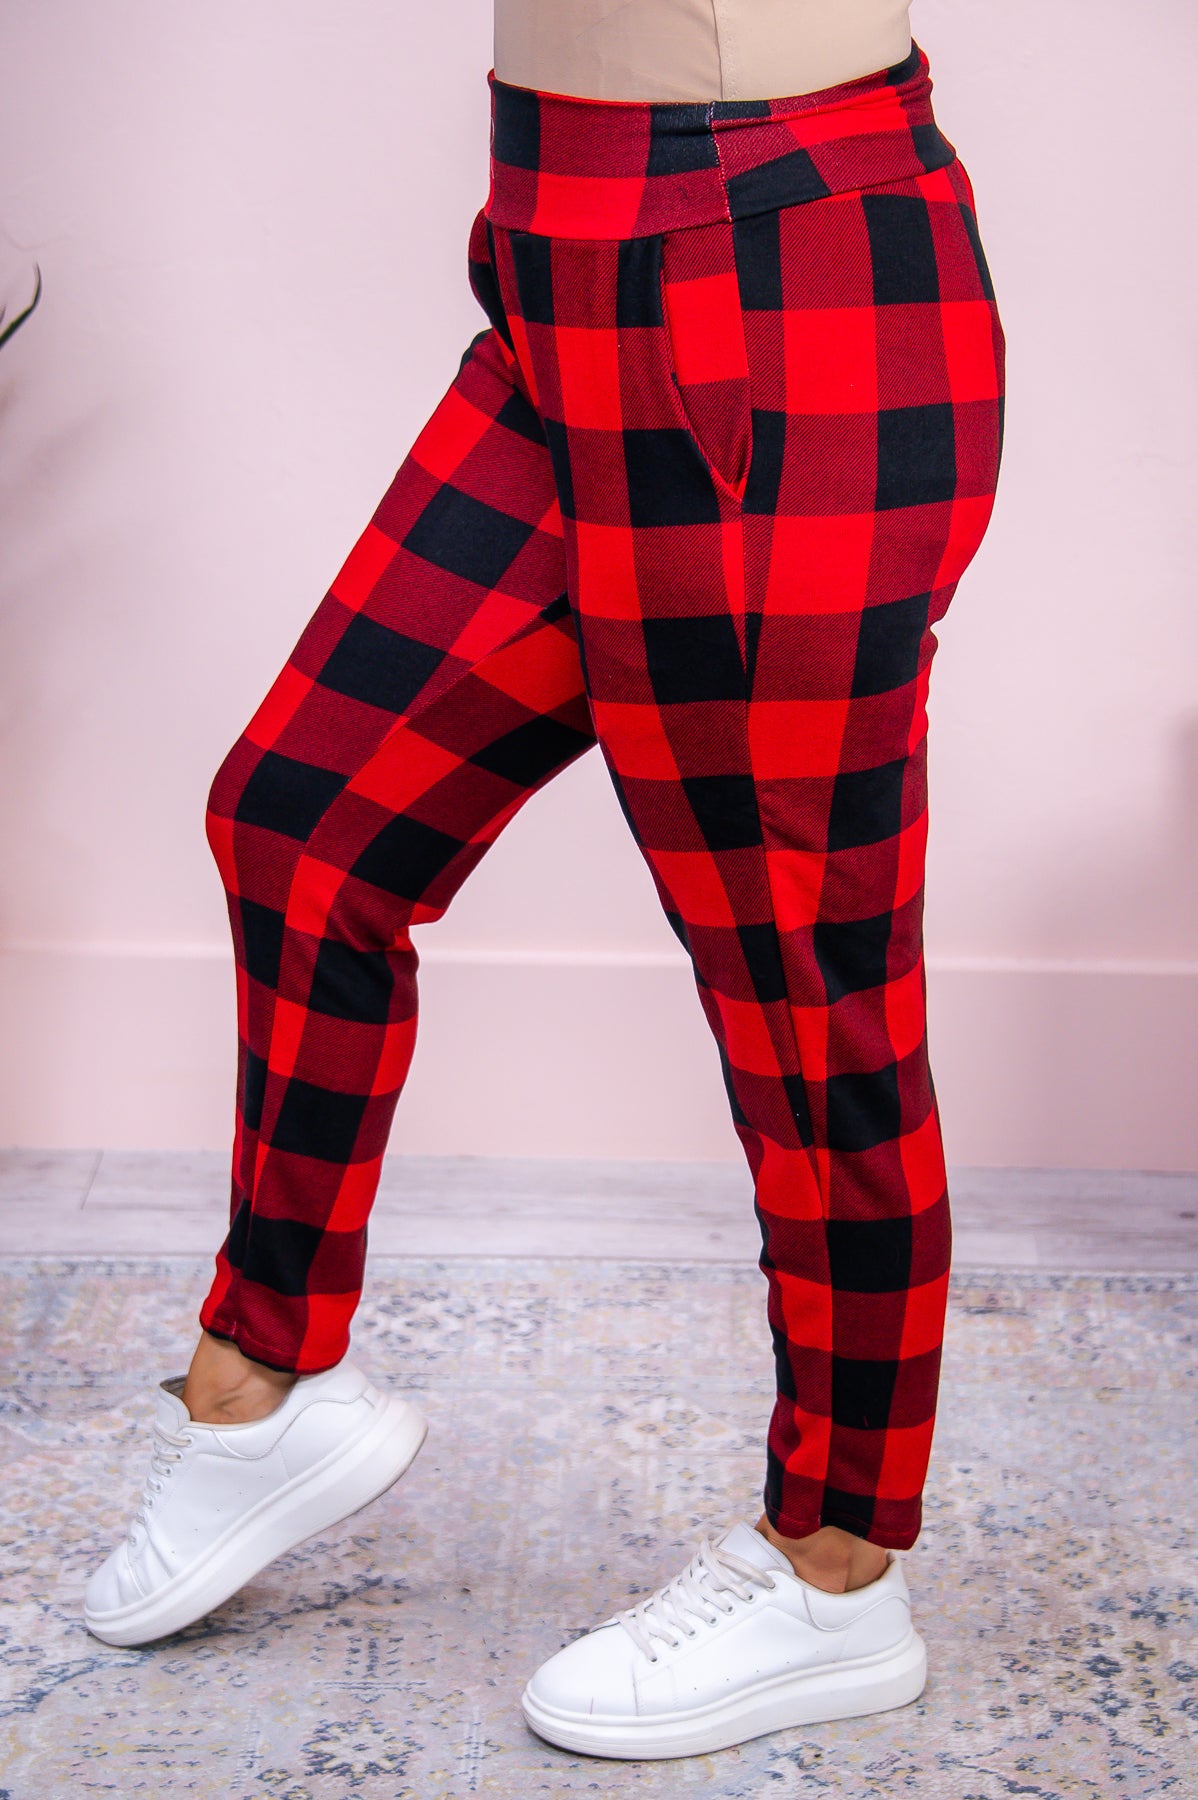 Quiet As A Mouse Red/Black Checkered Pajama Pants - PNT1537RD